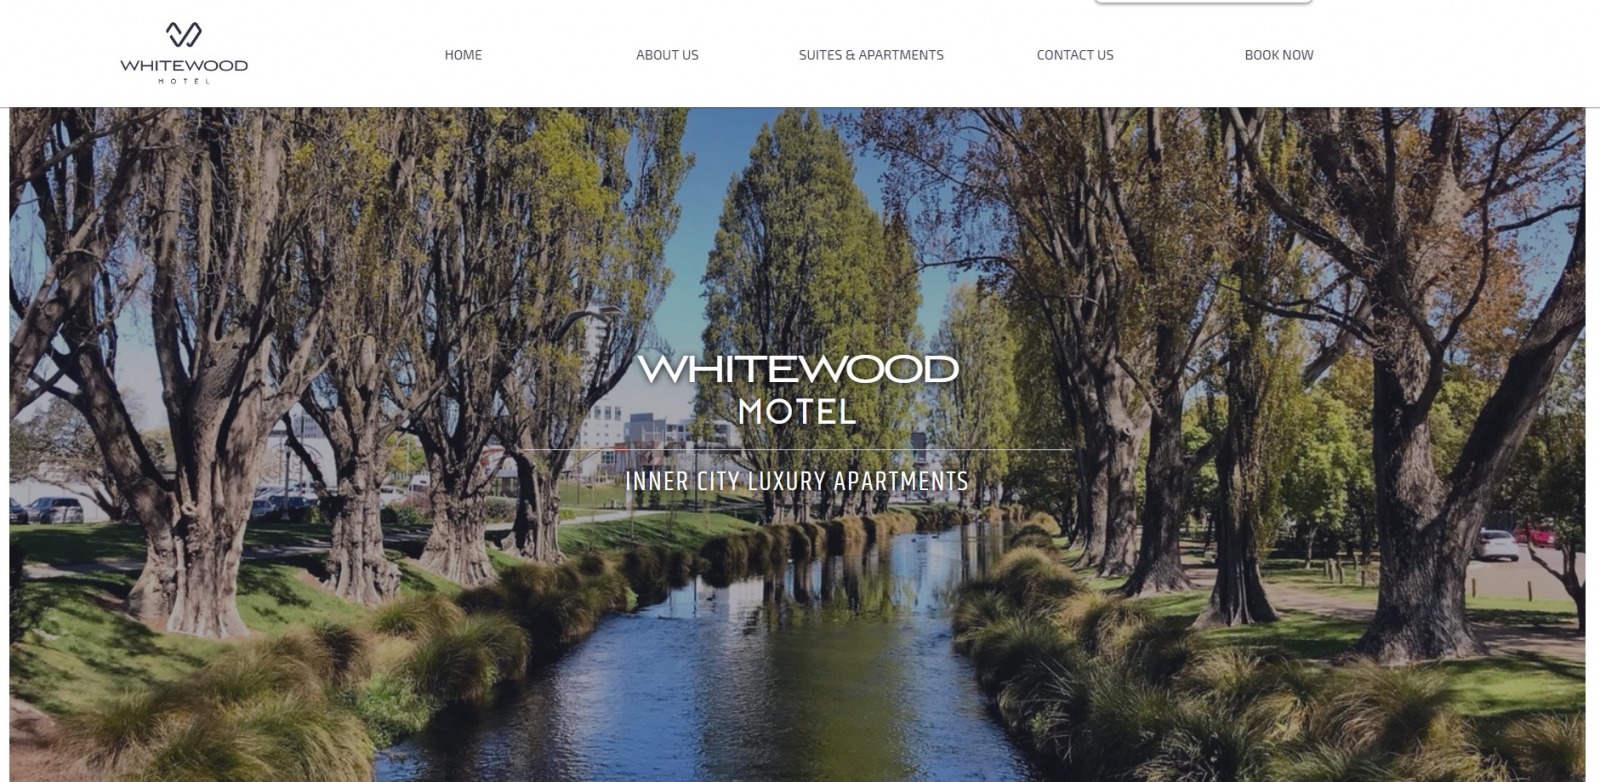 whitewood - About